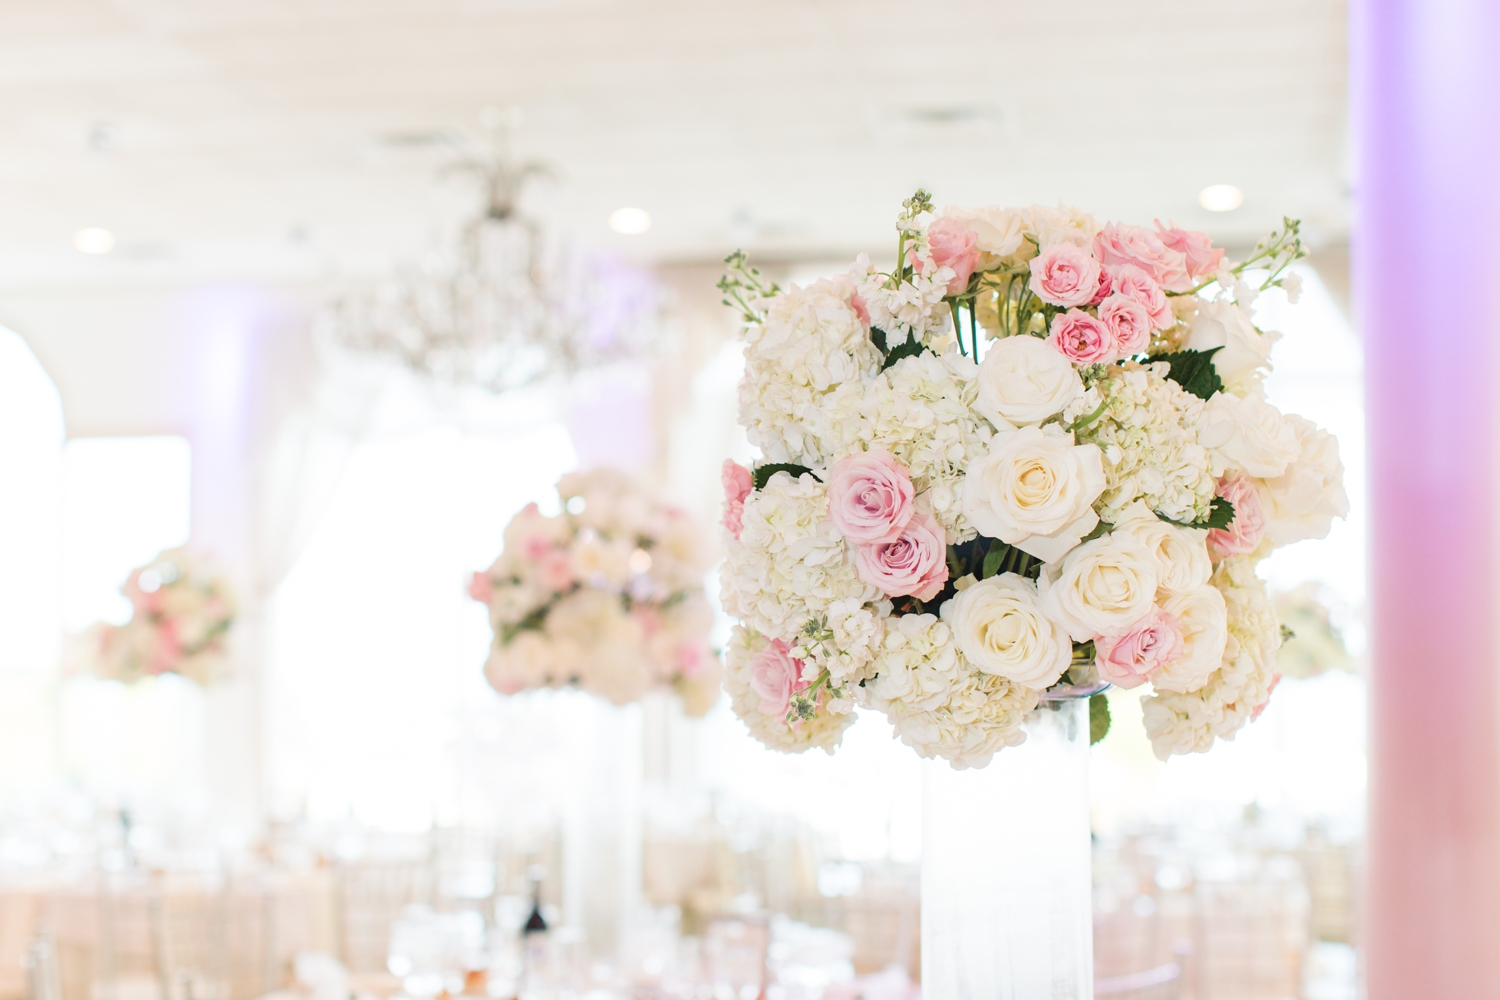 greentree-country-club-wedding-new-rochelle-ny-connecticut-photographer-shaina-lee-photography-photo